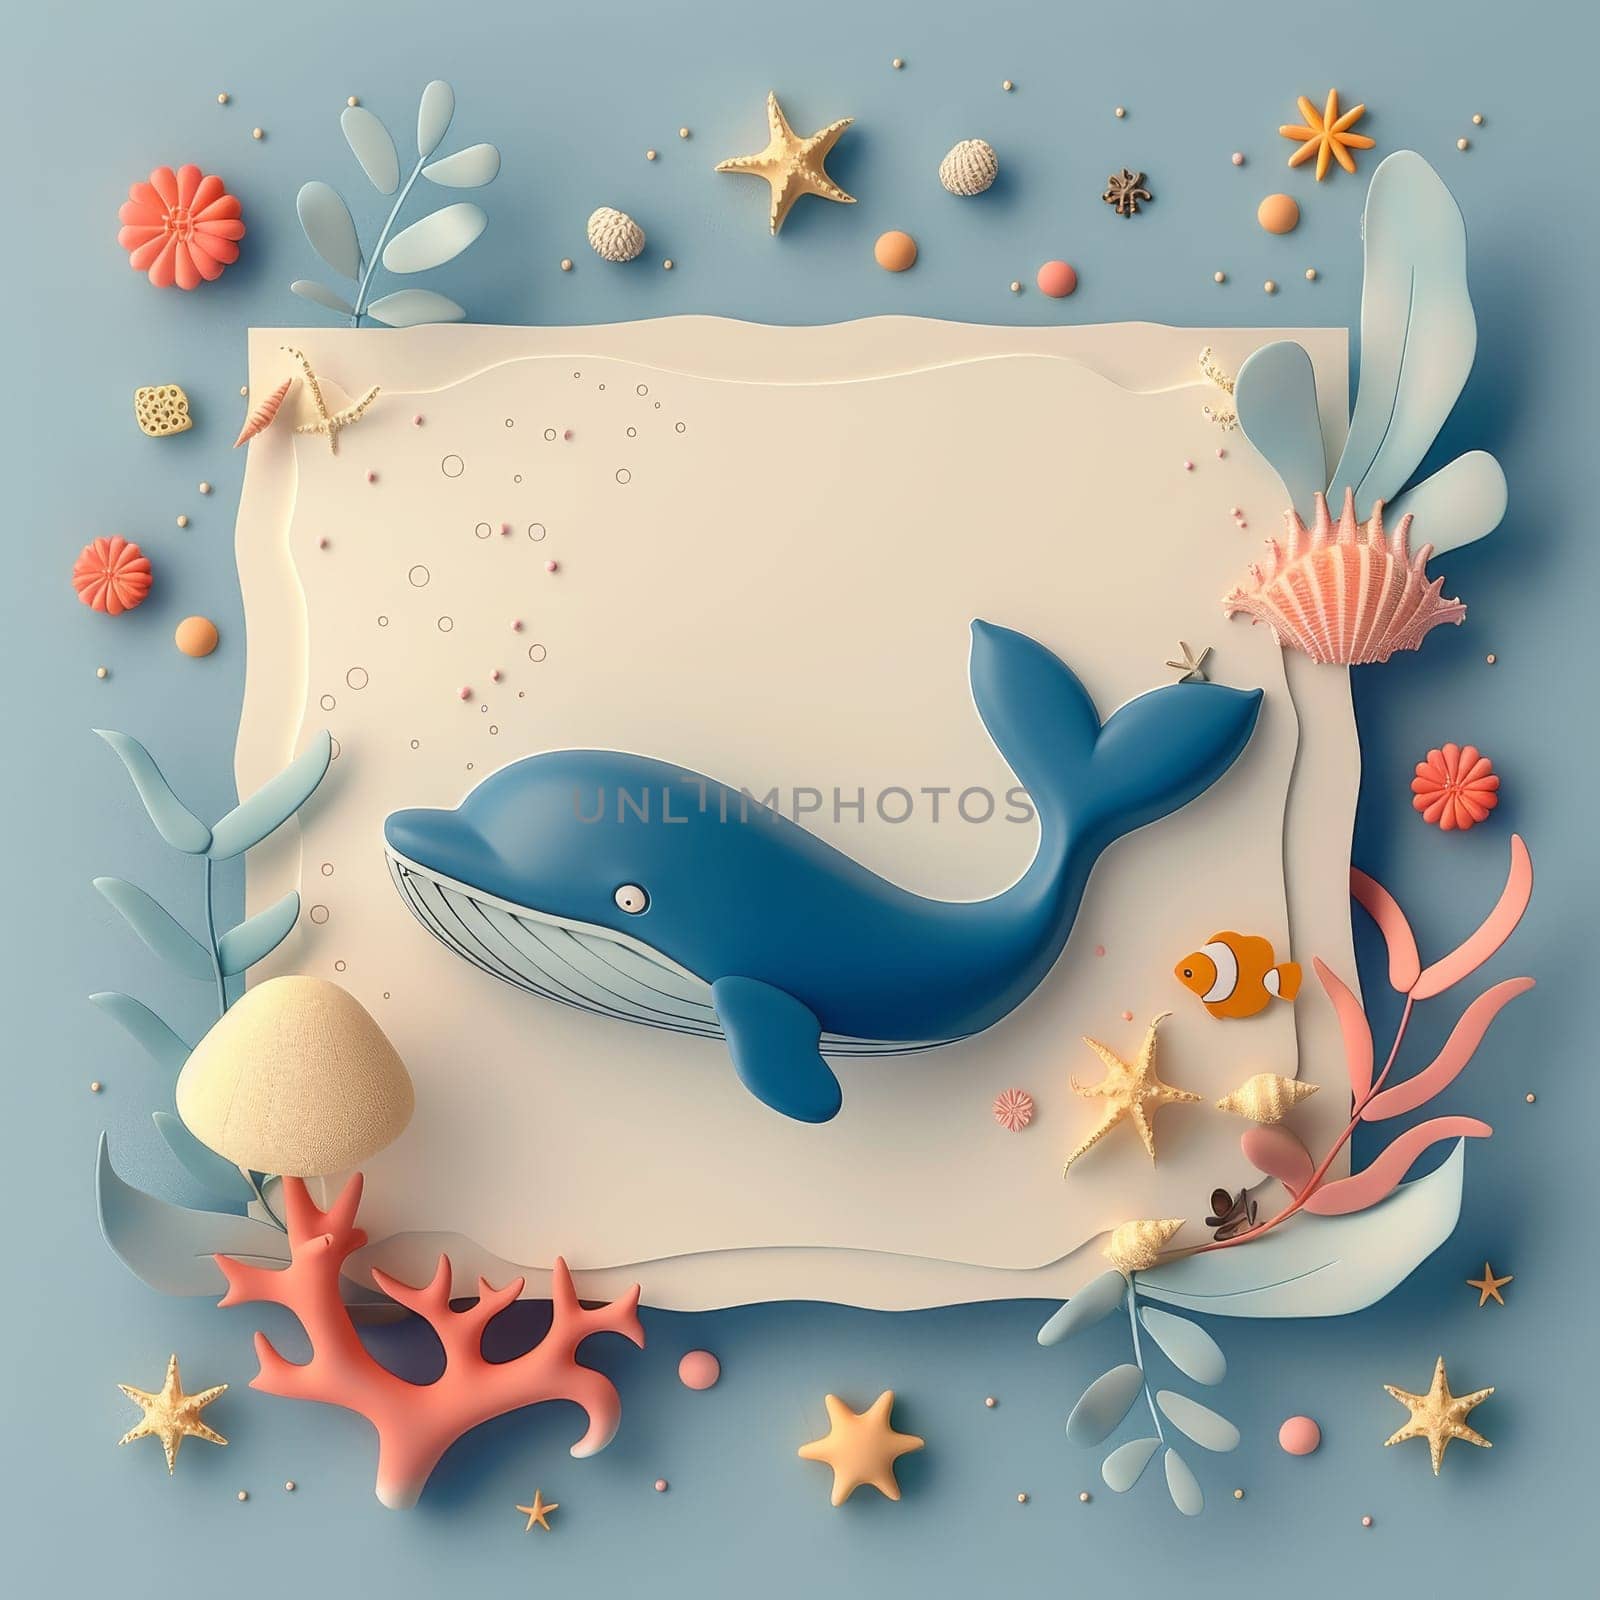 A blue whale is surrounded by a variety of sea creatures and plants. Concept of wonder and curiosity about the ocean and its inhabitants